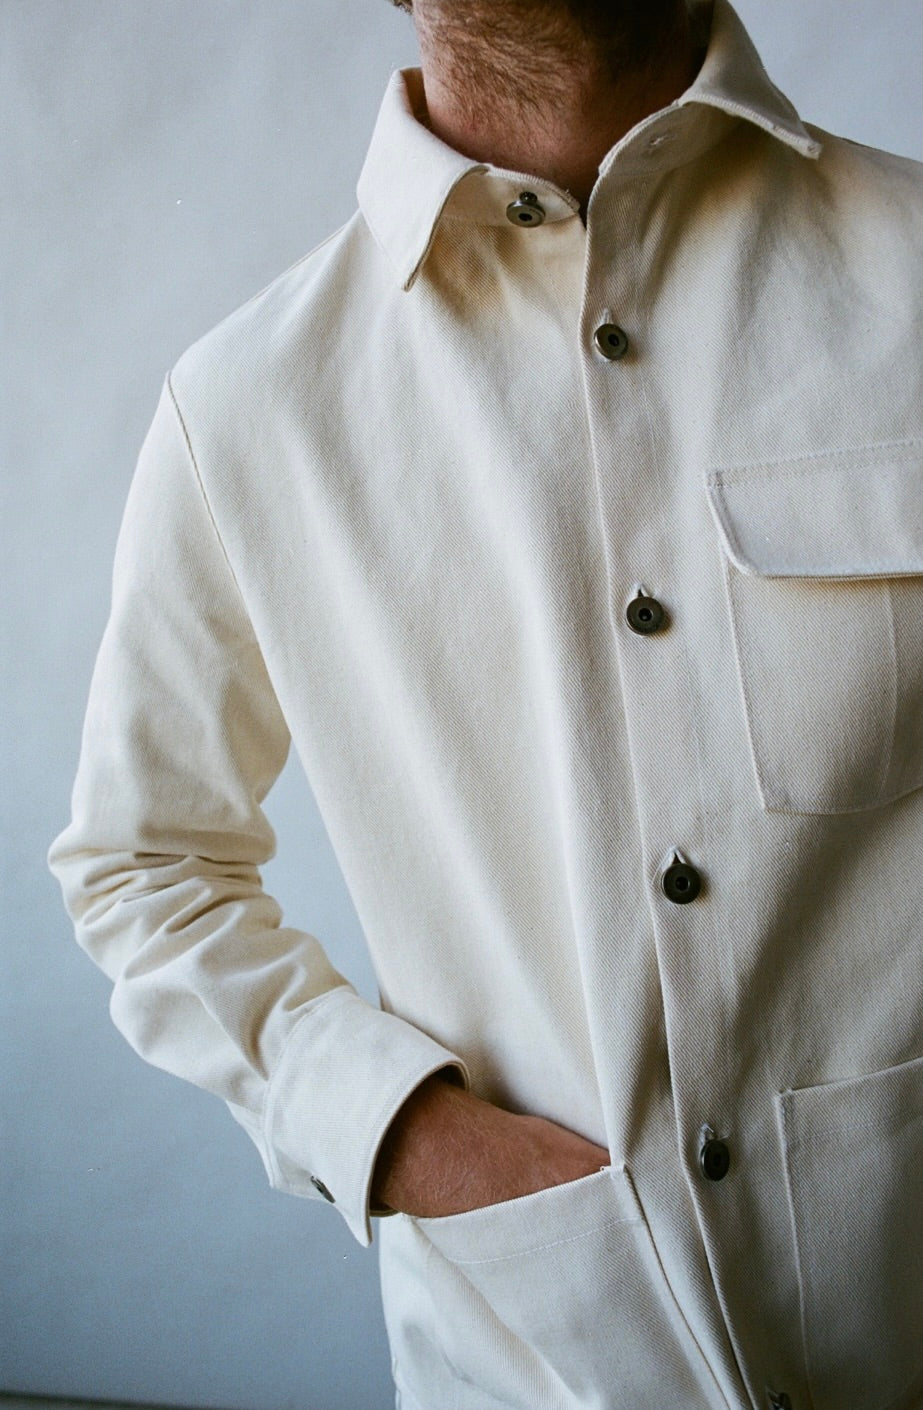 Unisex Jacket No. 001 - The Chore Coat in Natural